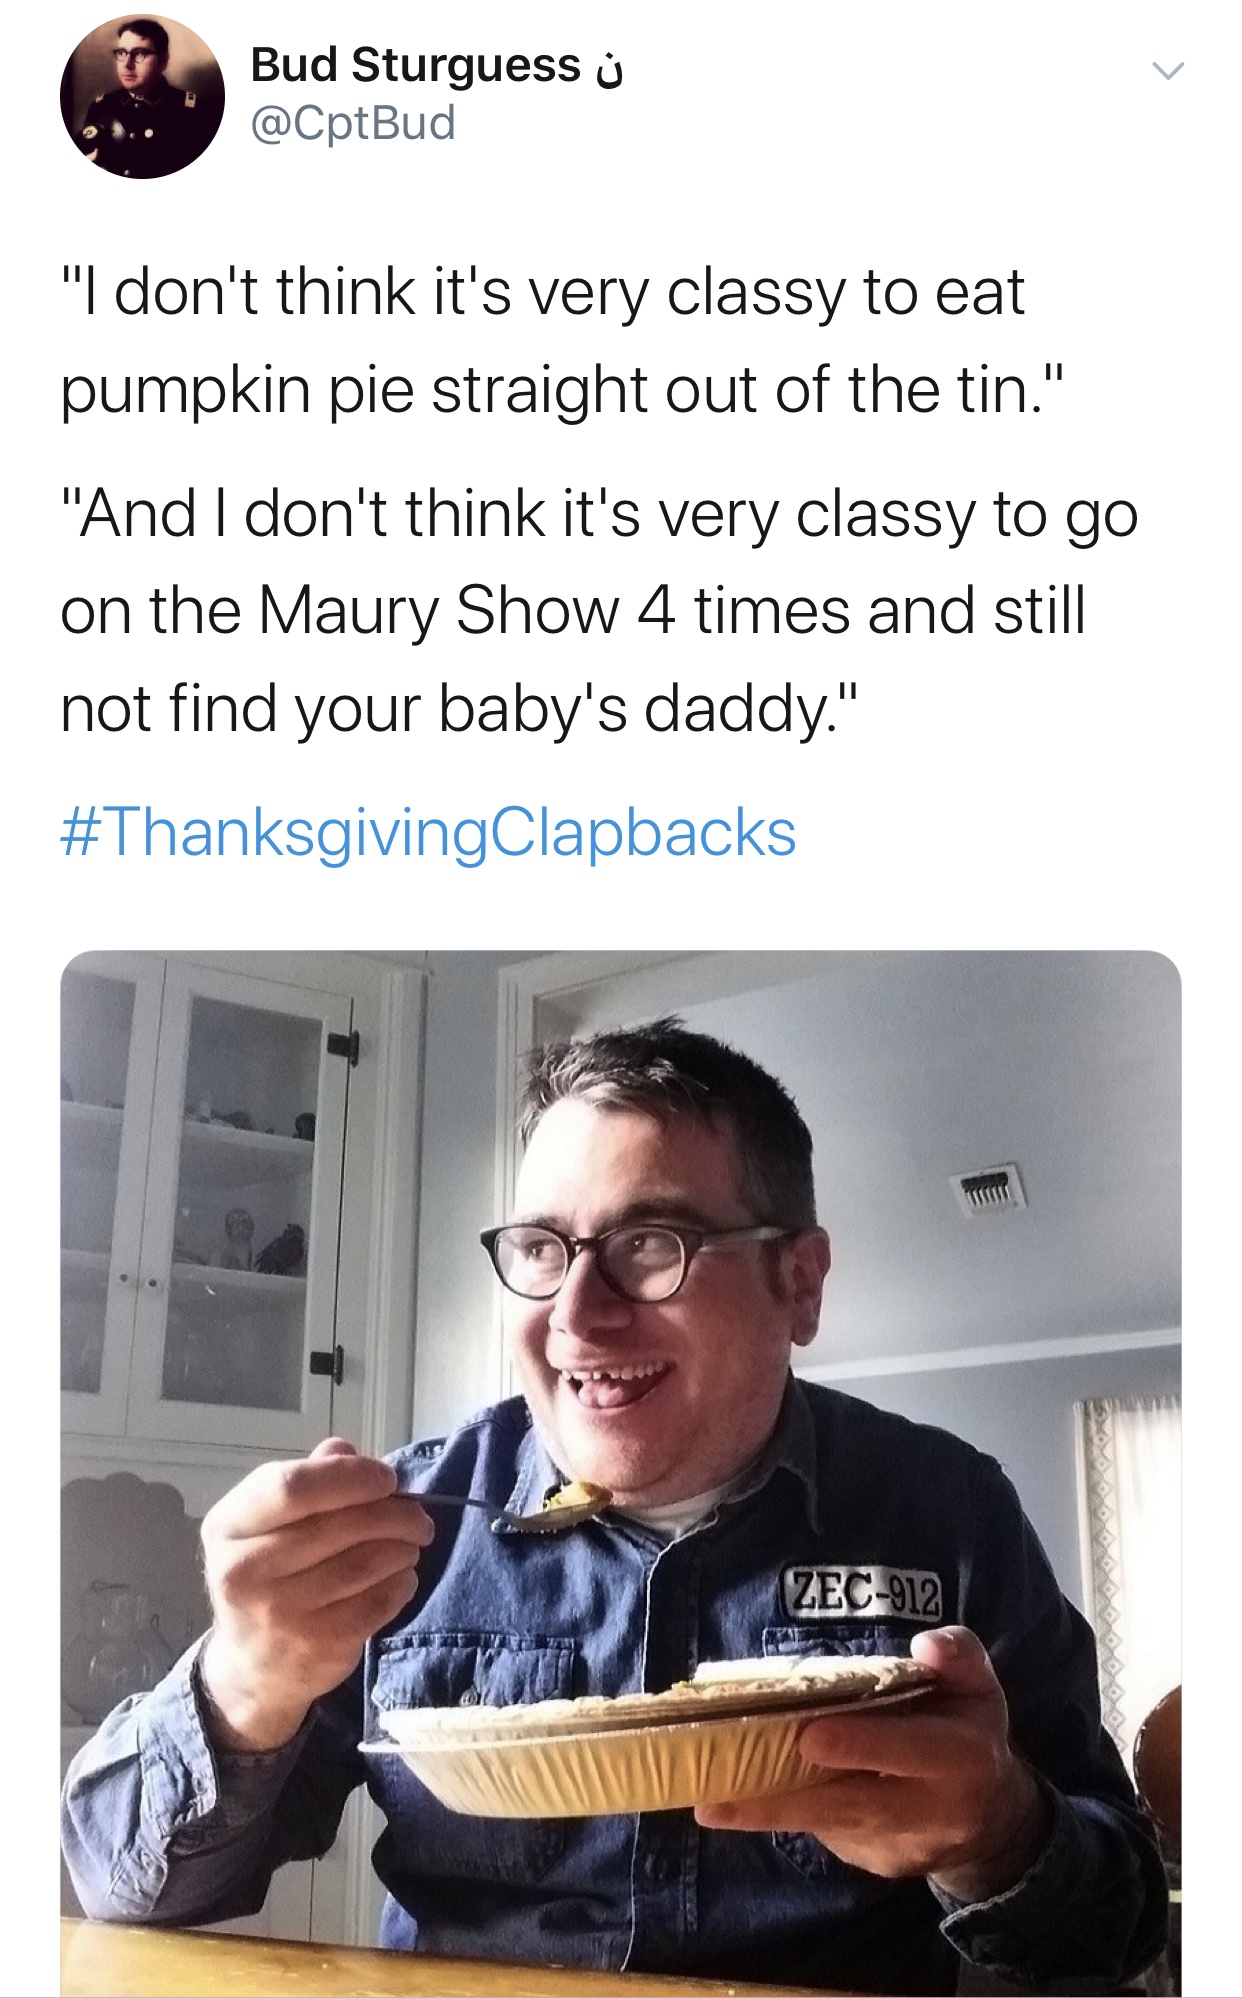 photo caption - Bud Sturguess o Cpt Bud "I don't think it's very classy to eat pumpkin pie straight out of the tin." "And I don't think it's very classy to go on the Maury Show 4 times and still not find your baby's daddy." Clapbacks Zec2